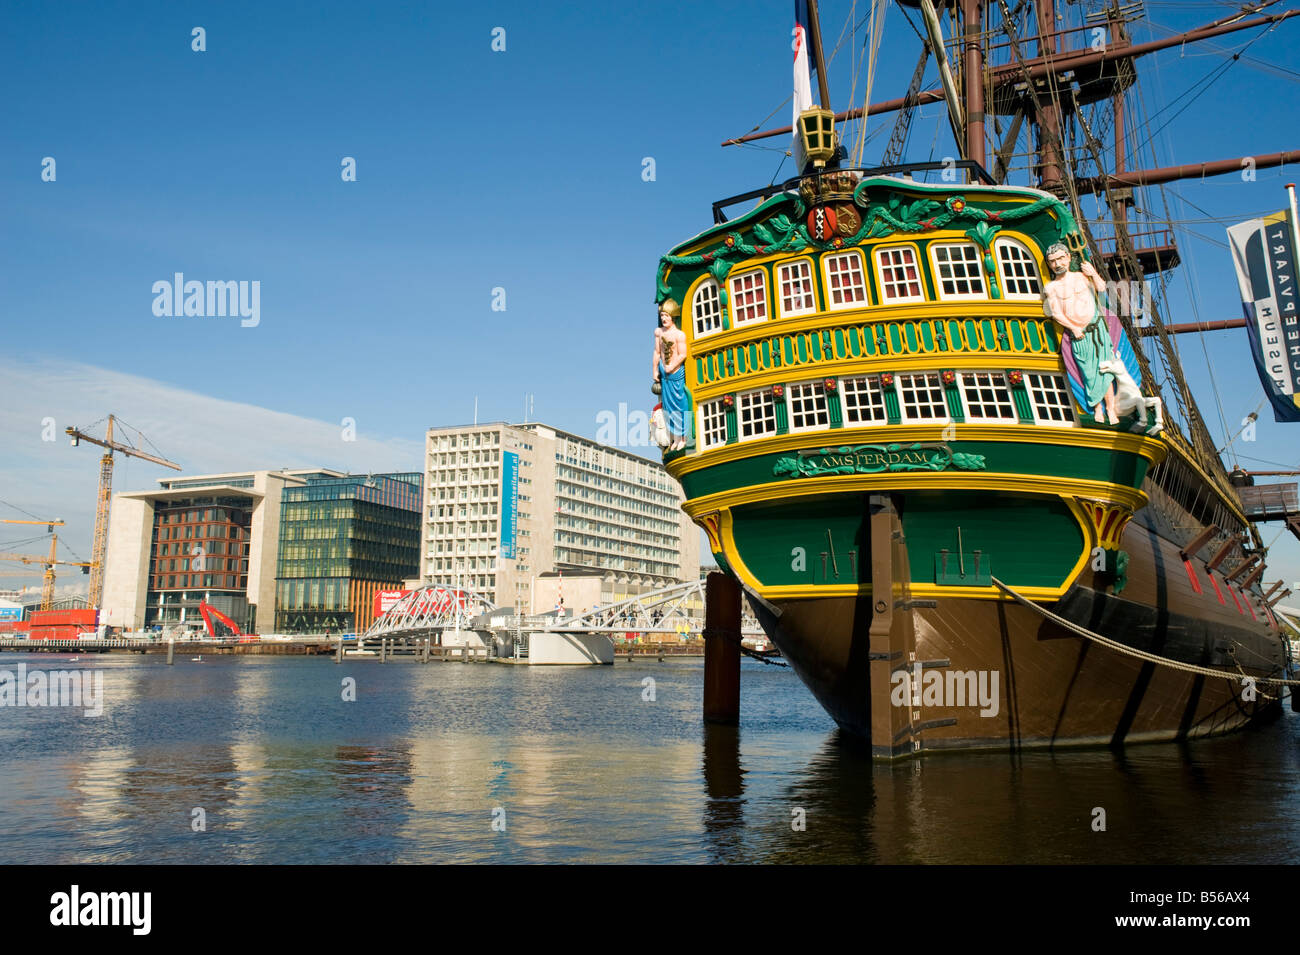 Old sailing ship 'Amsterdam' on display at Maritime Museum Scheepvartmuseum in Amsterdam with new office developments to rear Stock Photo